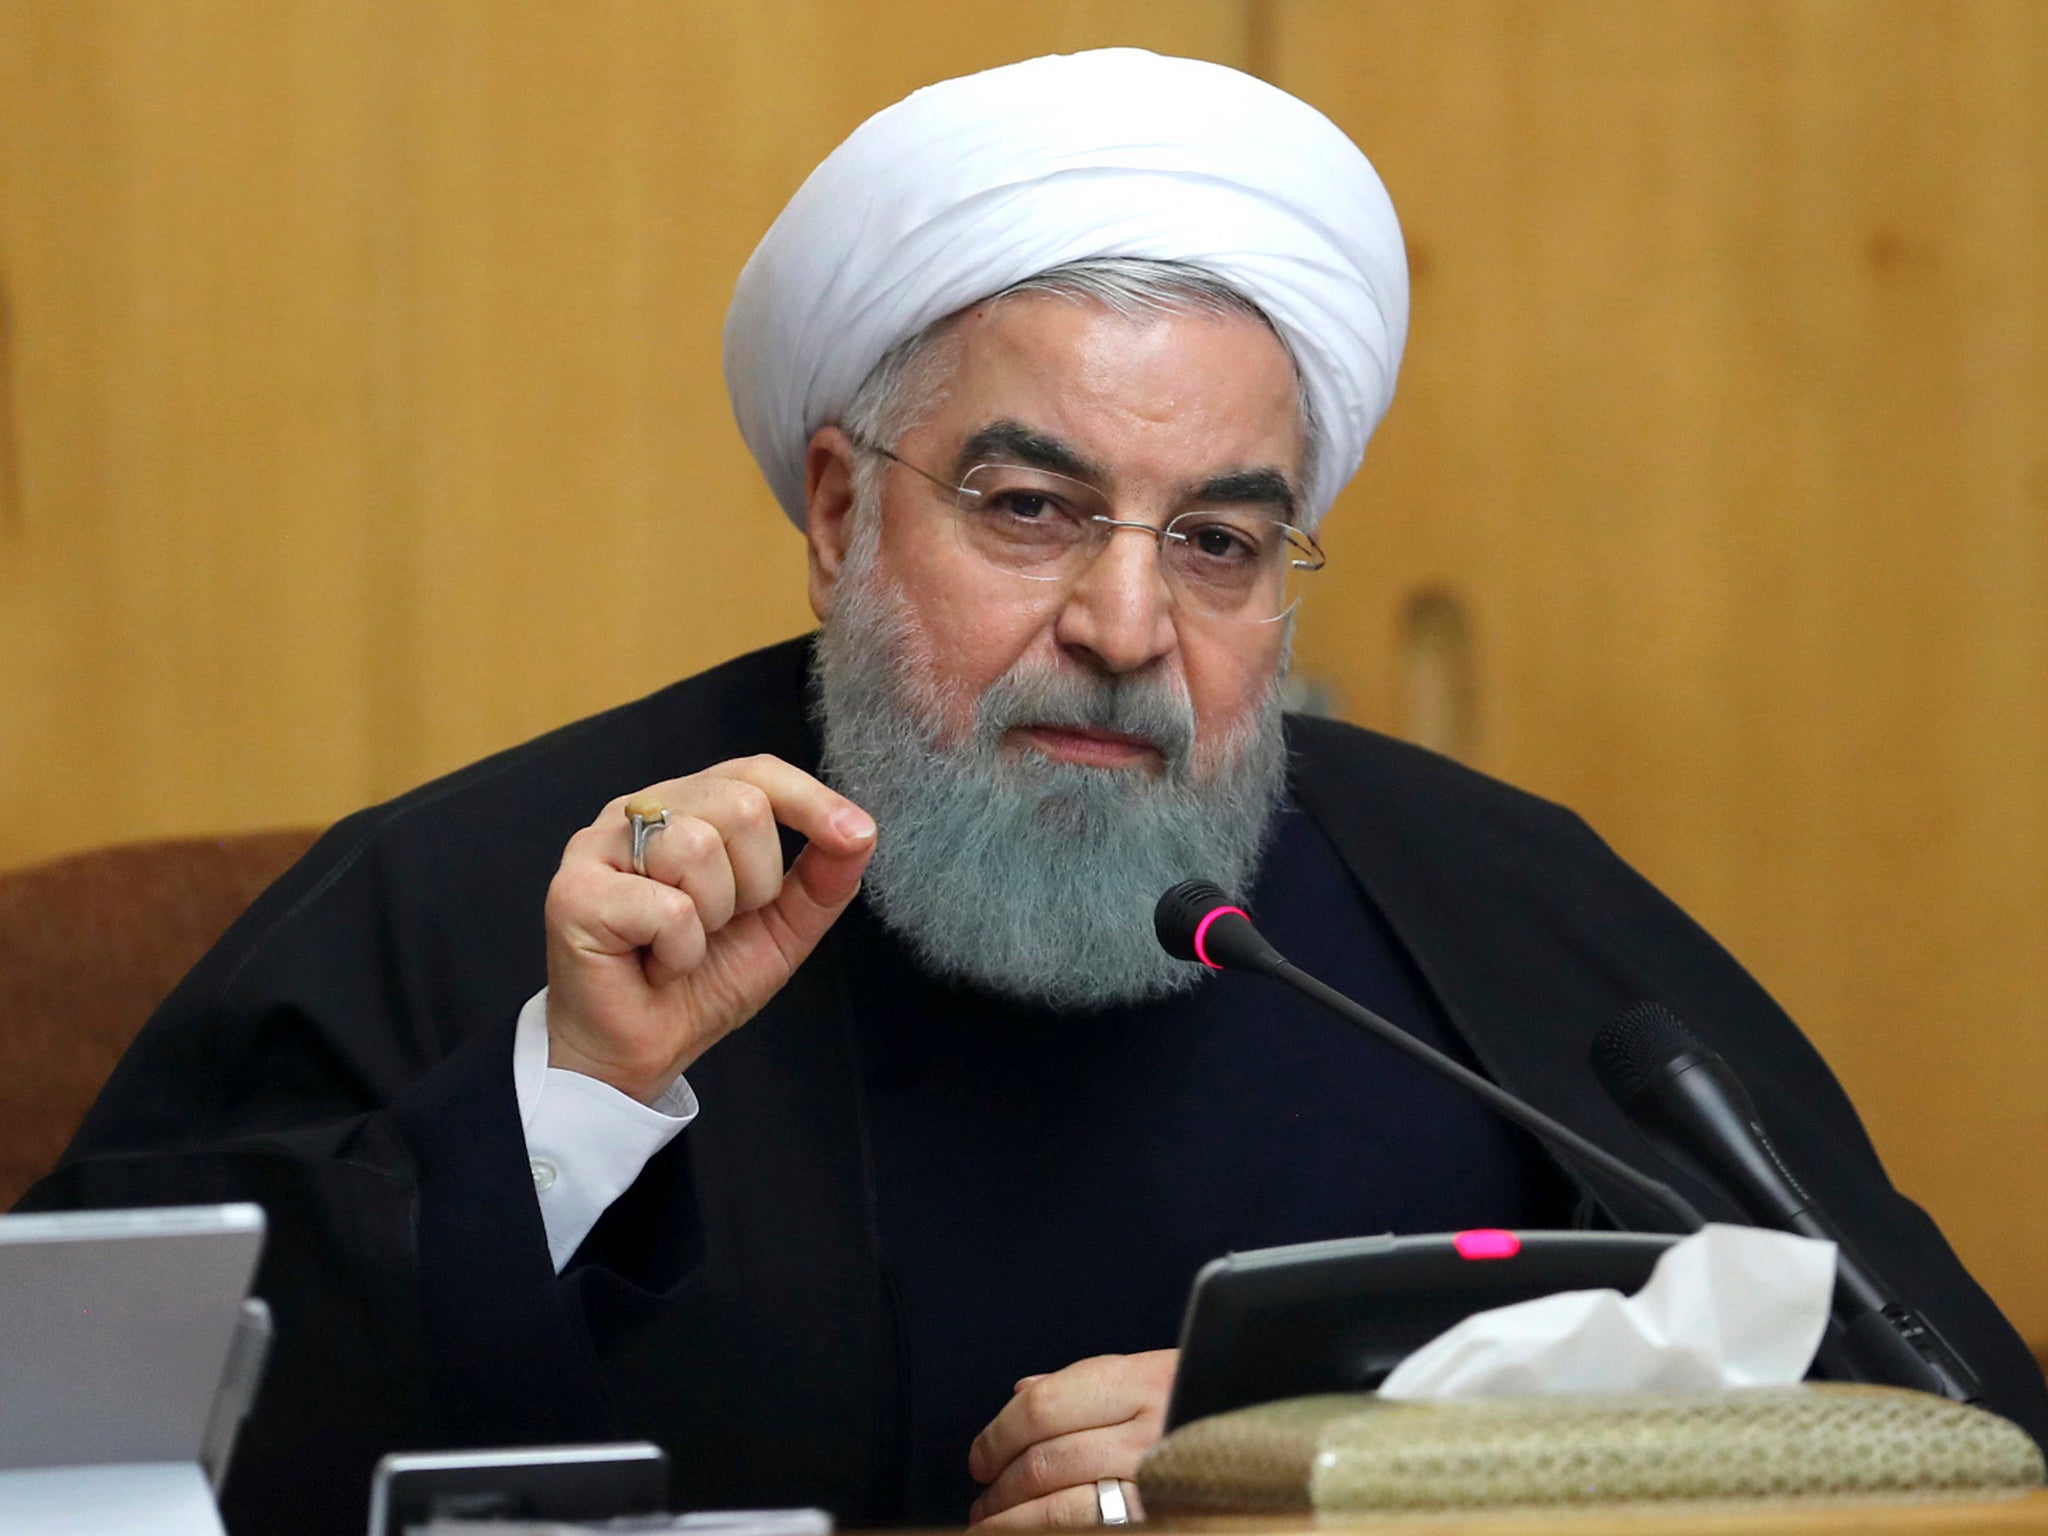 Calls for both President Rouhani and supreme leader Ayatollah Ali Khameni to step down have grown across Iran in recent weeks